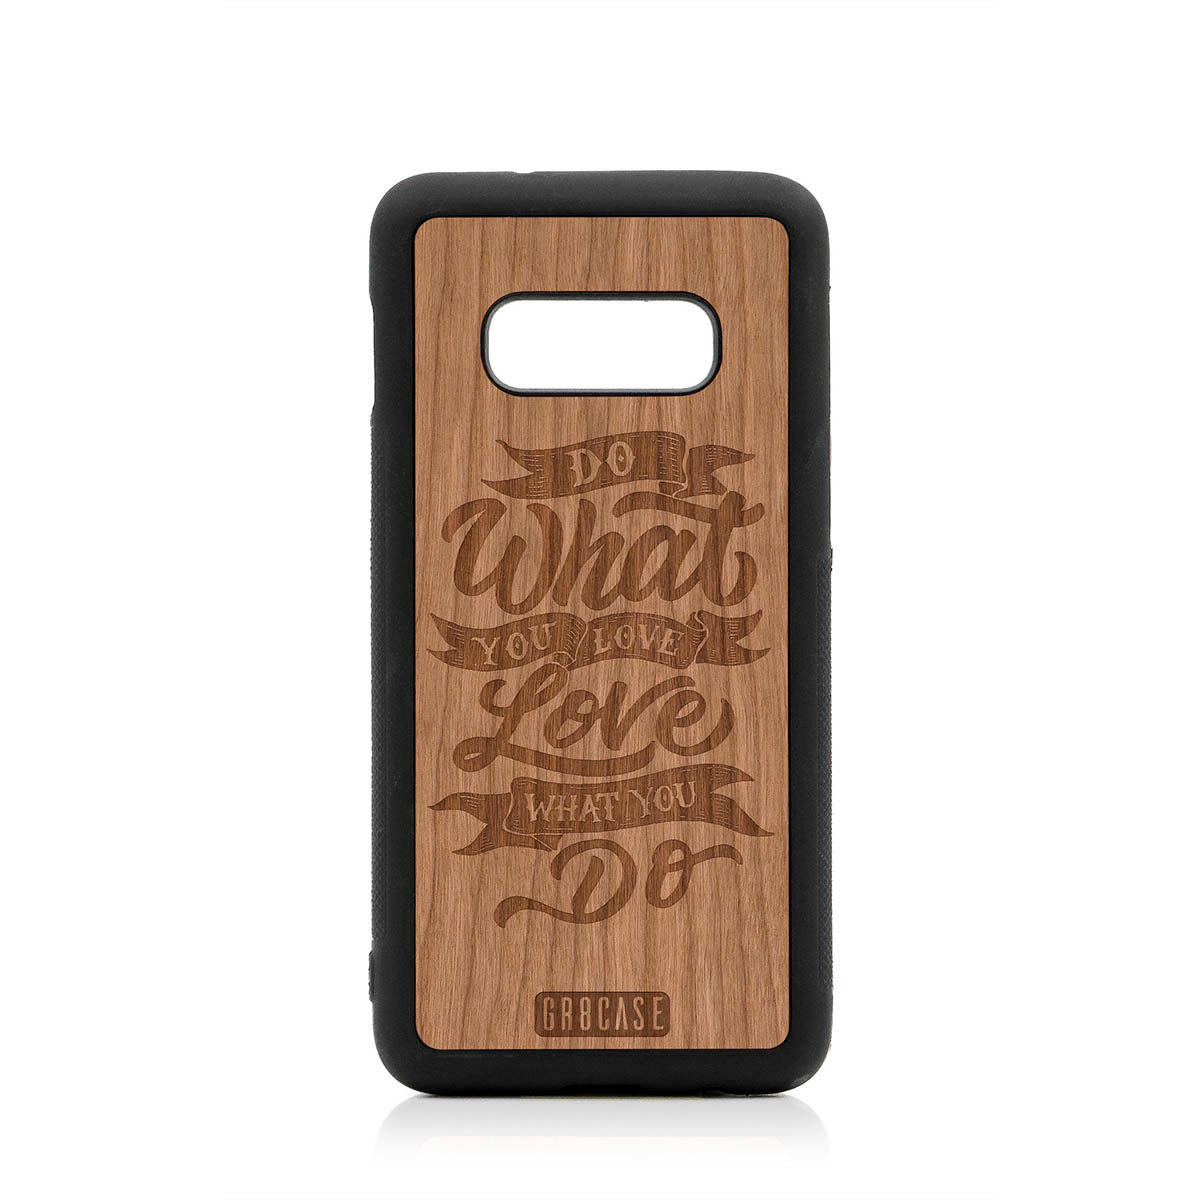 Do What You Love Love What You Do Design Wood Case For Samsung Galaxy S10E by GR8CASE